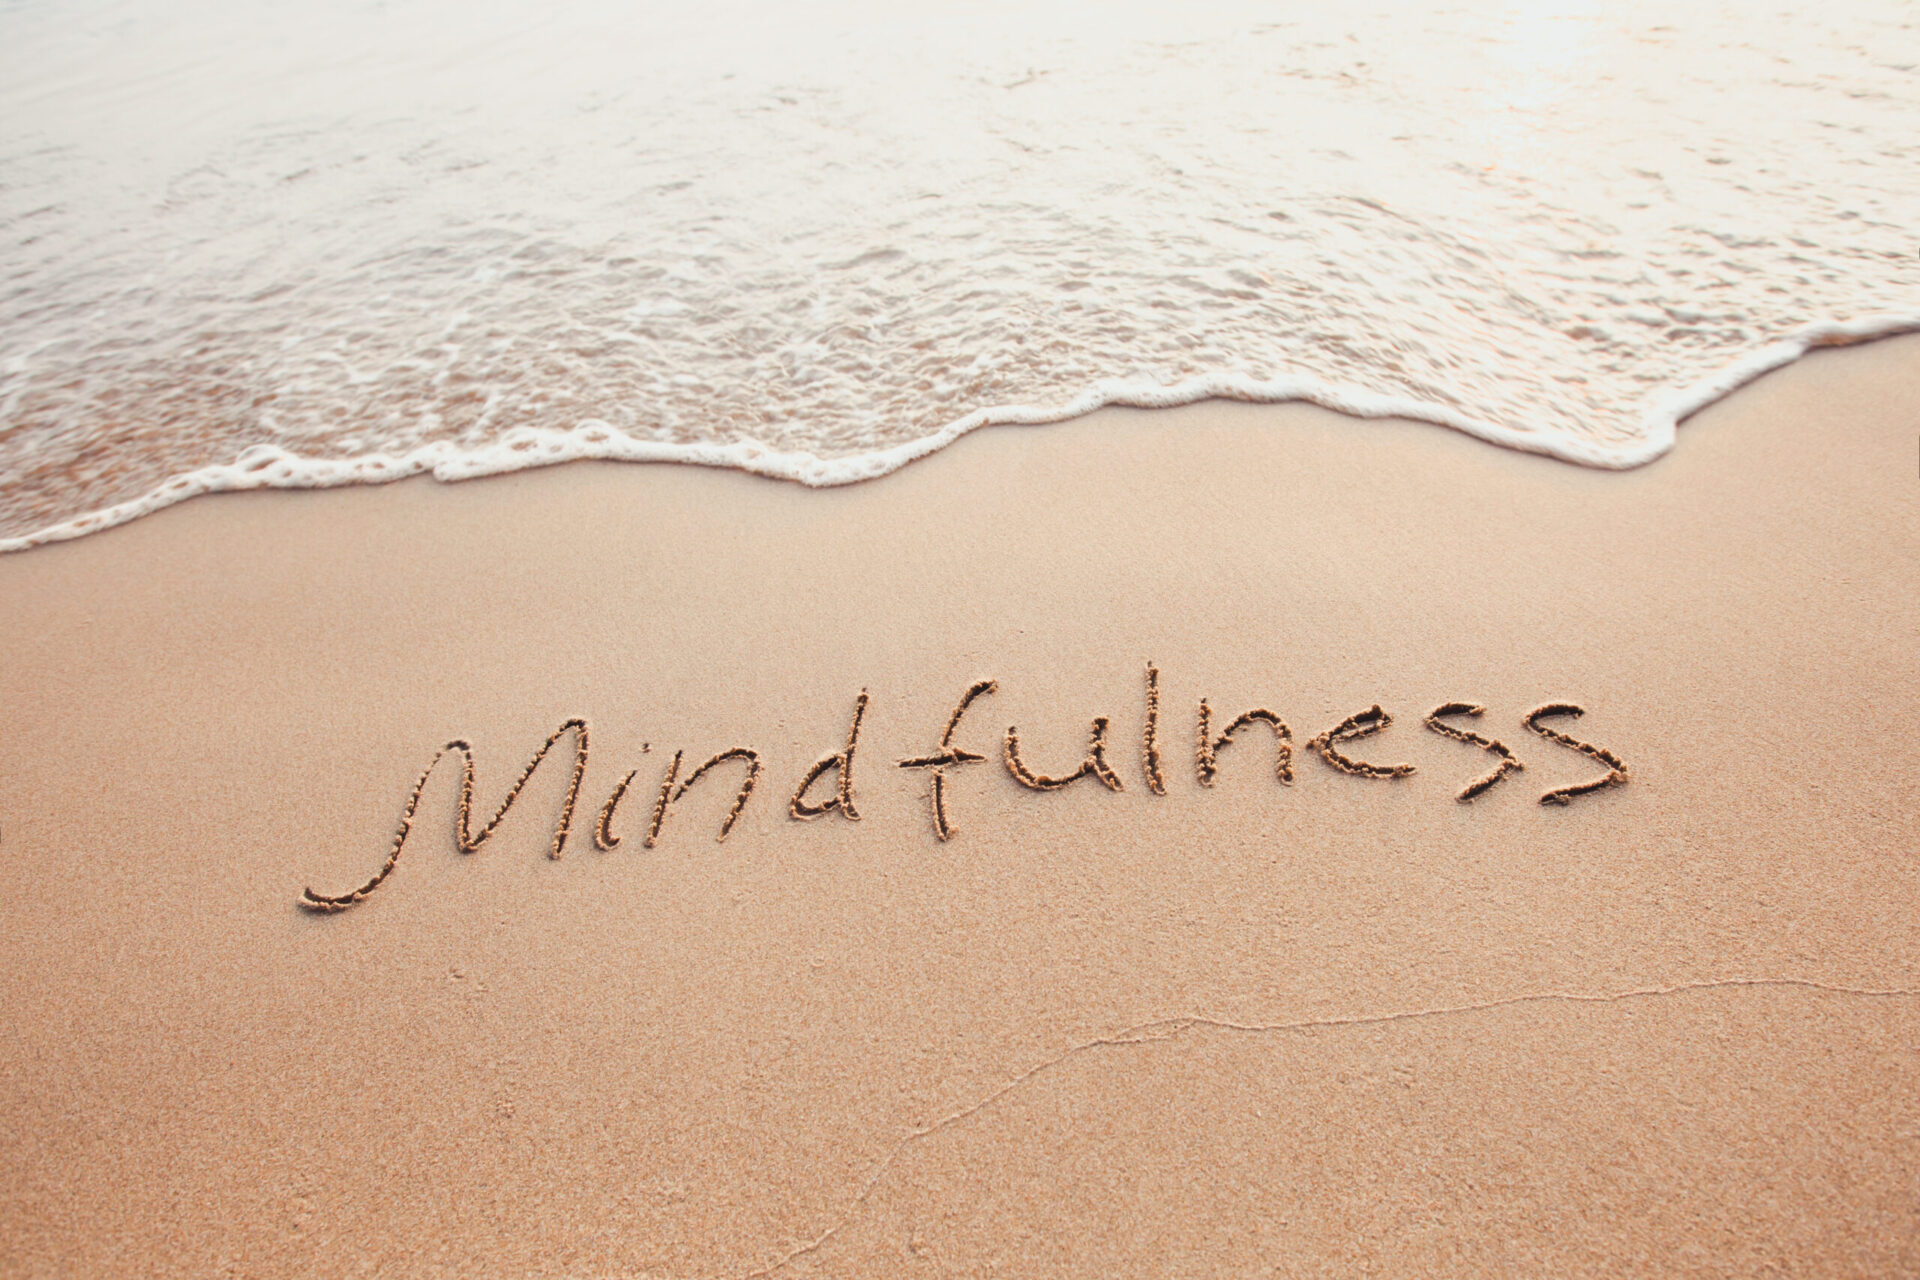 'Mindfulness' text written on the sand of beach